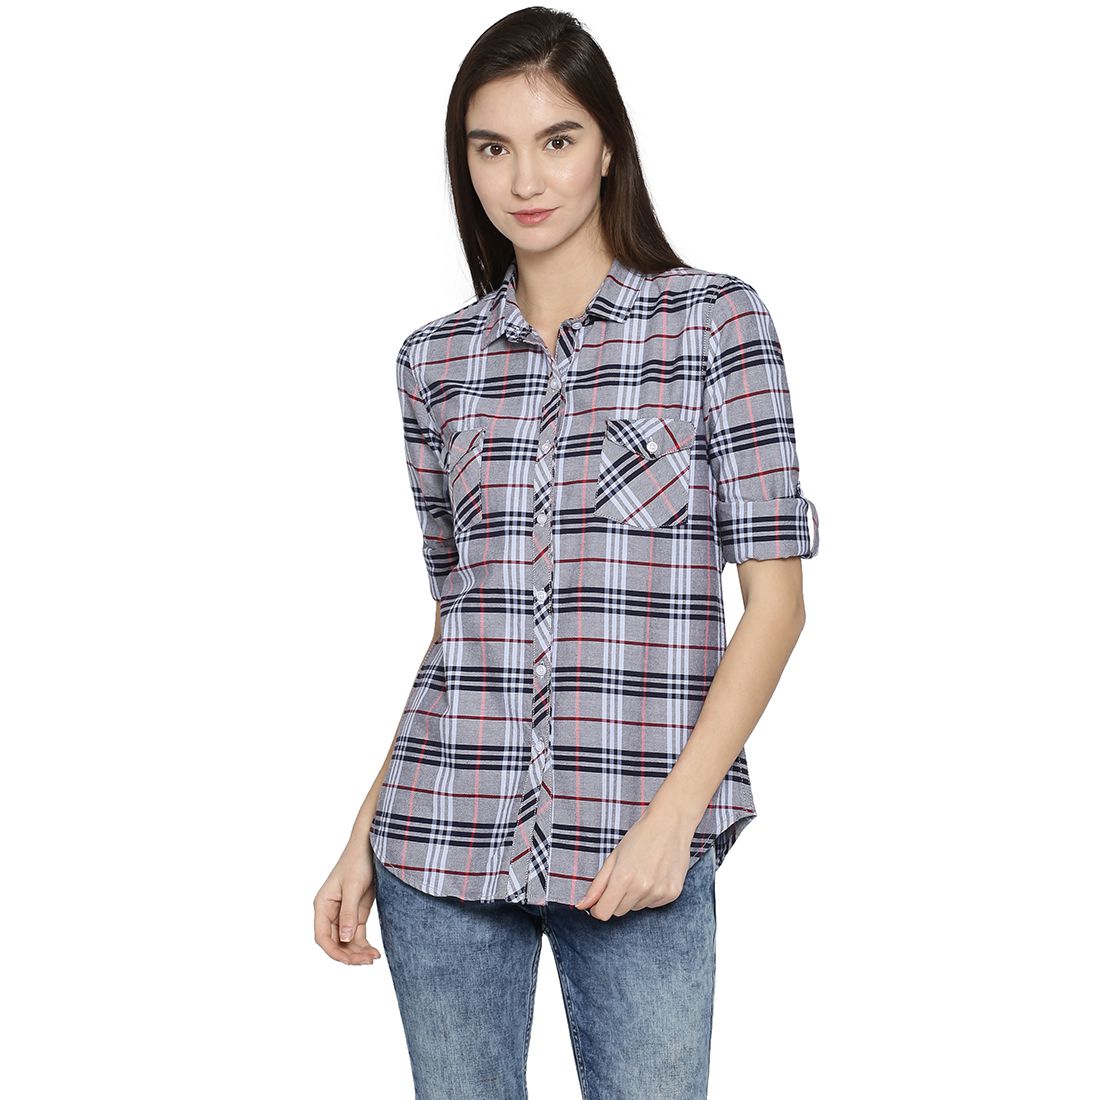 Buy Campus Sutra Cotton Shirt Online at Best Prices in India - Snapdeal